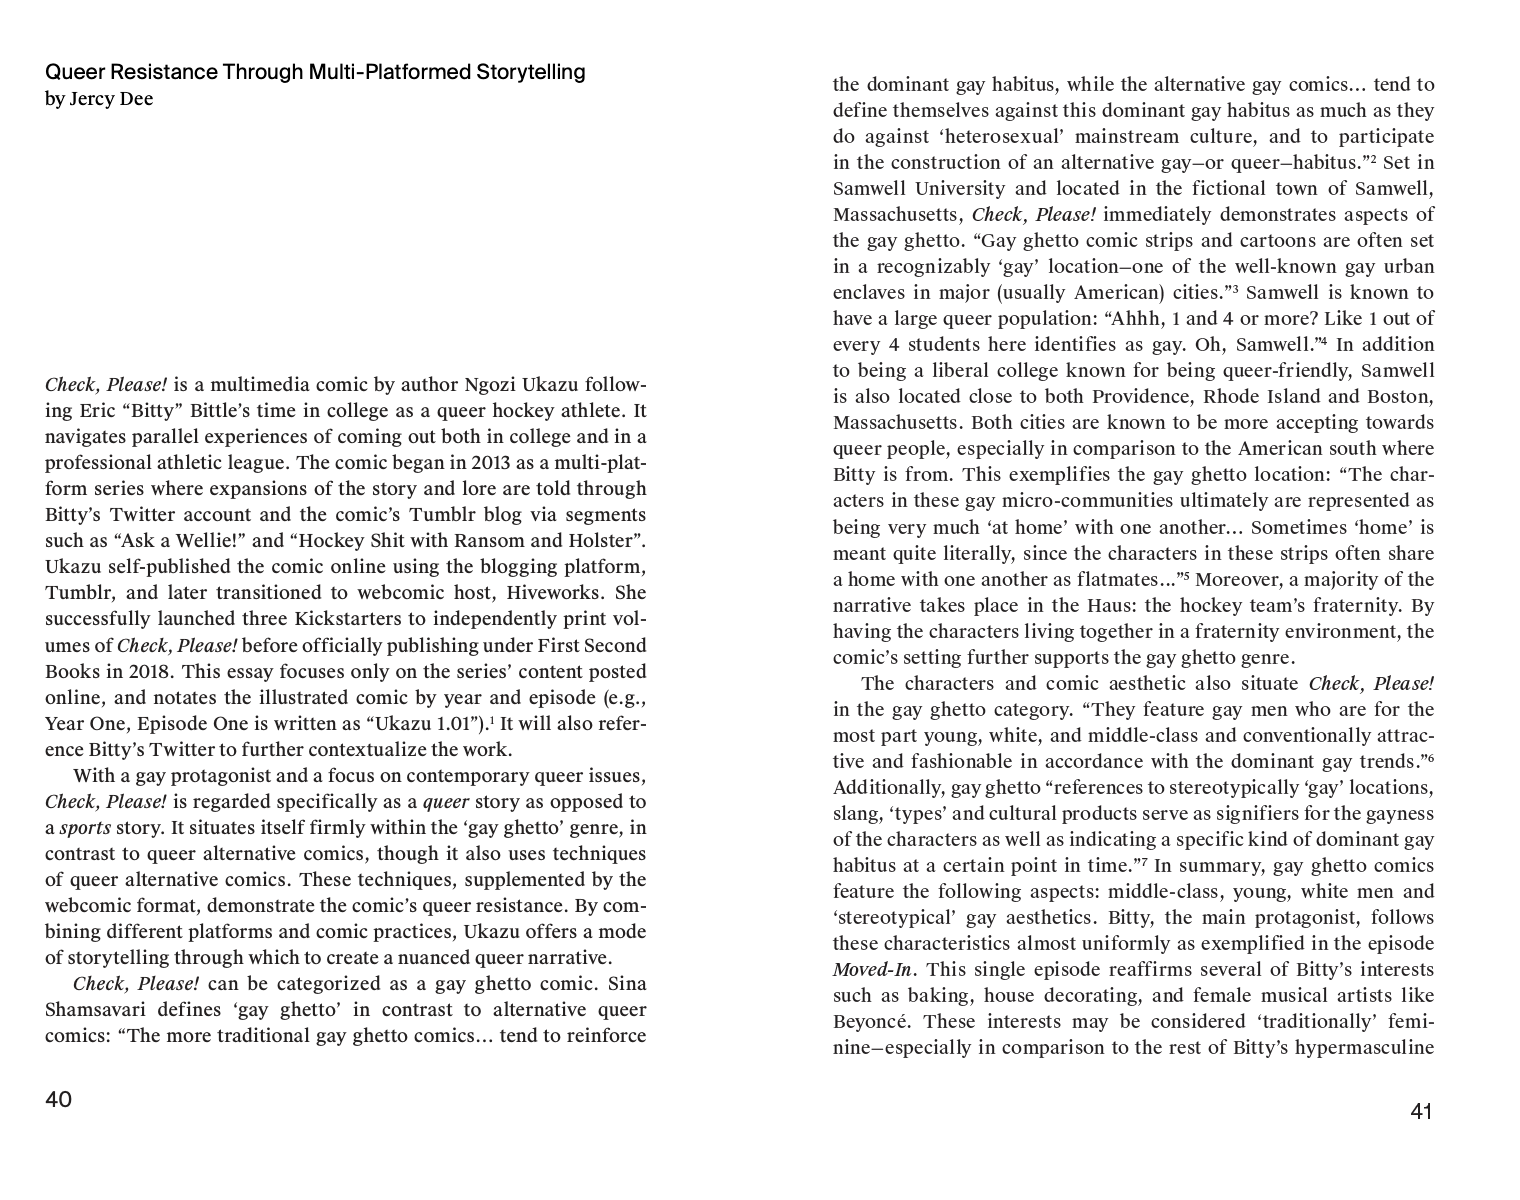 A digital collage of the first two pages of Queer Resistance.